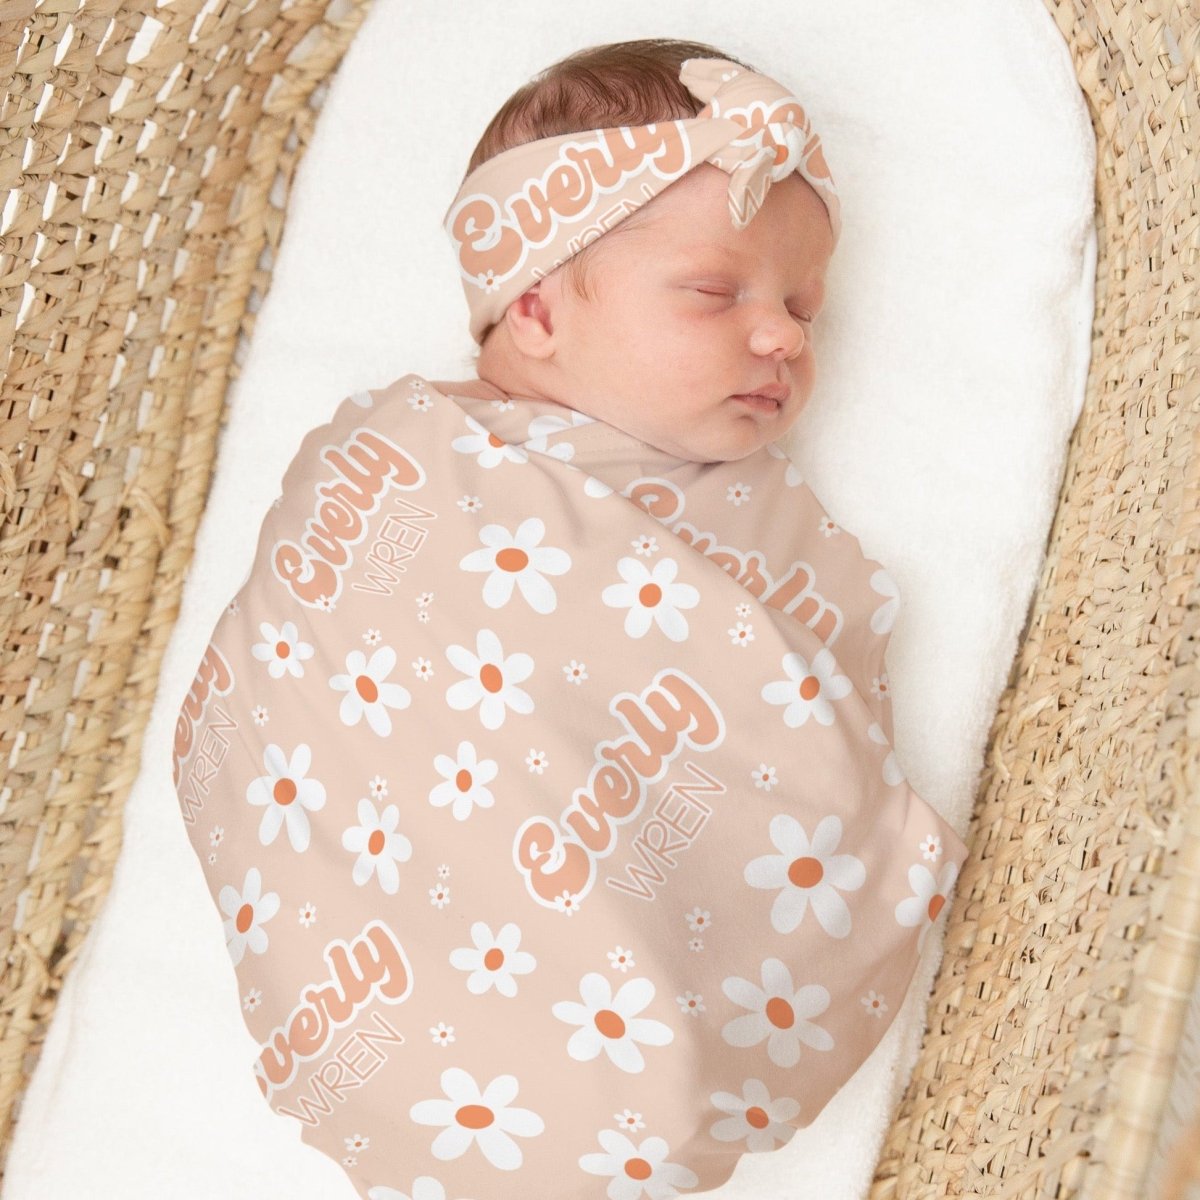 Daisy Personalized Swaddle Blanket Set - Daisy, gender_girl, text